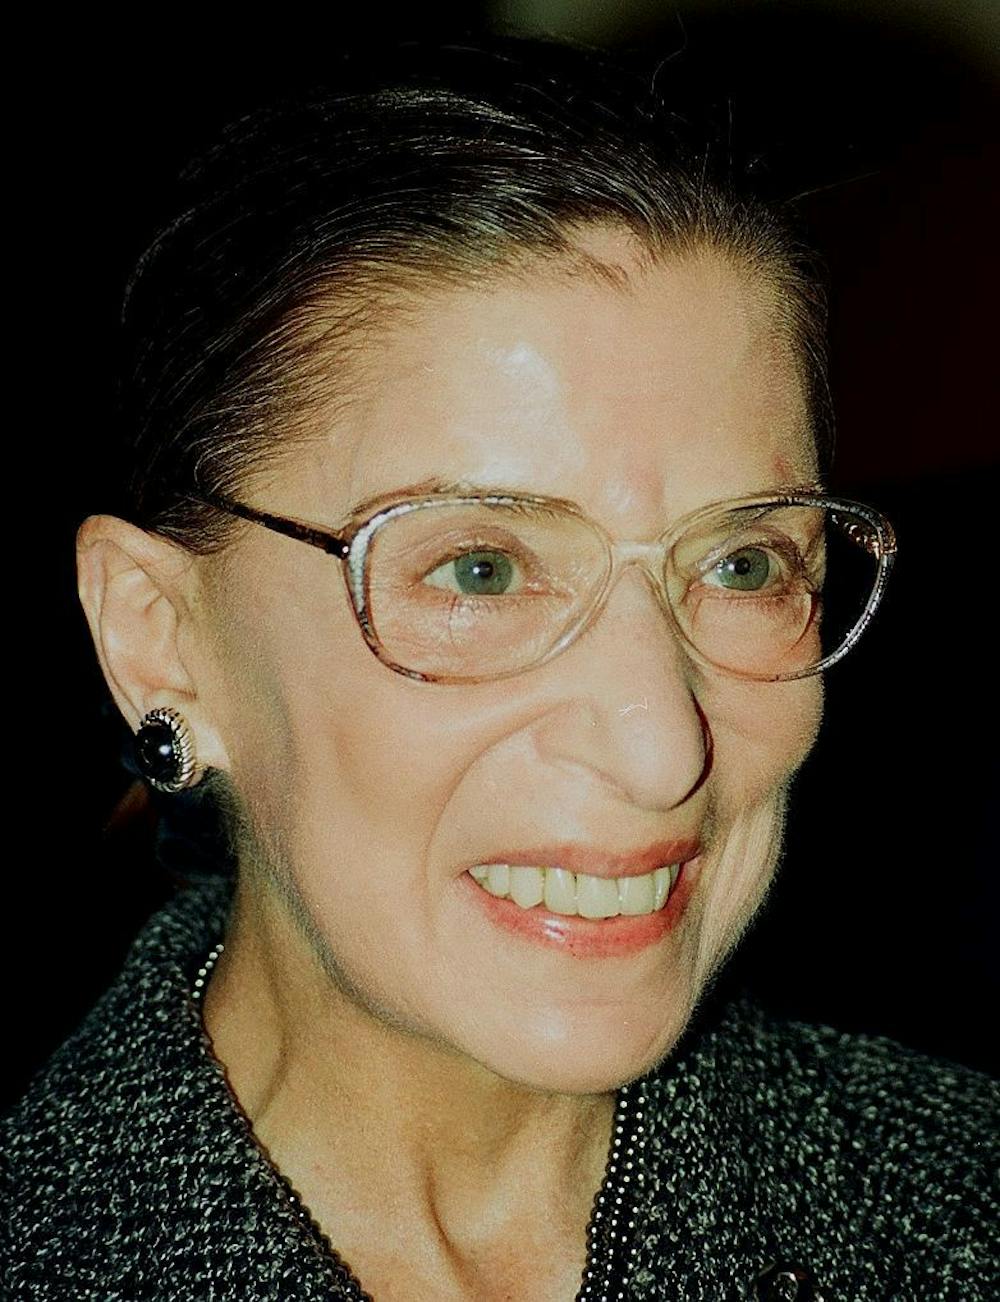 John Mathew Smith / CC BY-SA
Perlman honors Justice Ruth Bader Ginsburg and her commitment to gender equality.